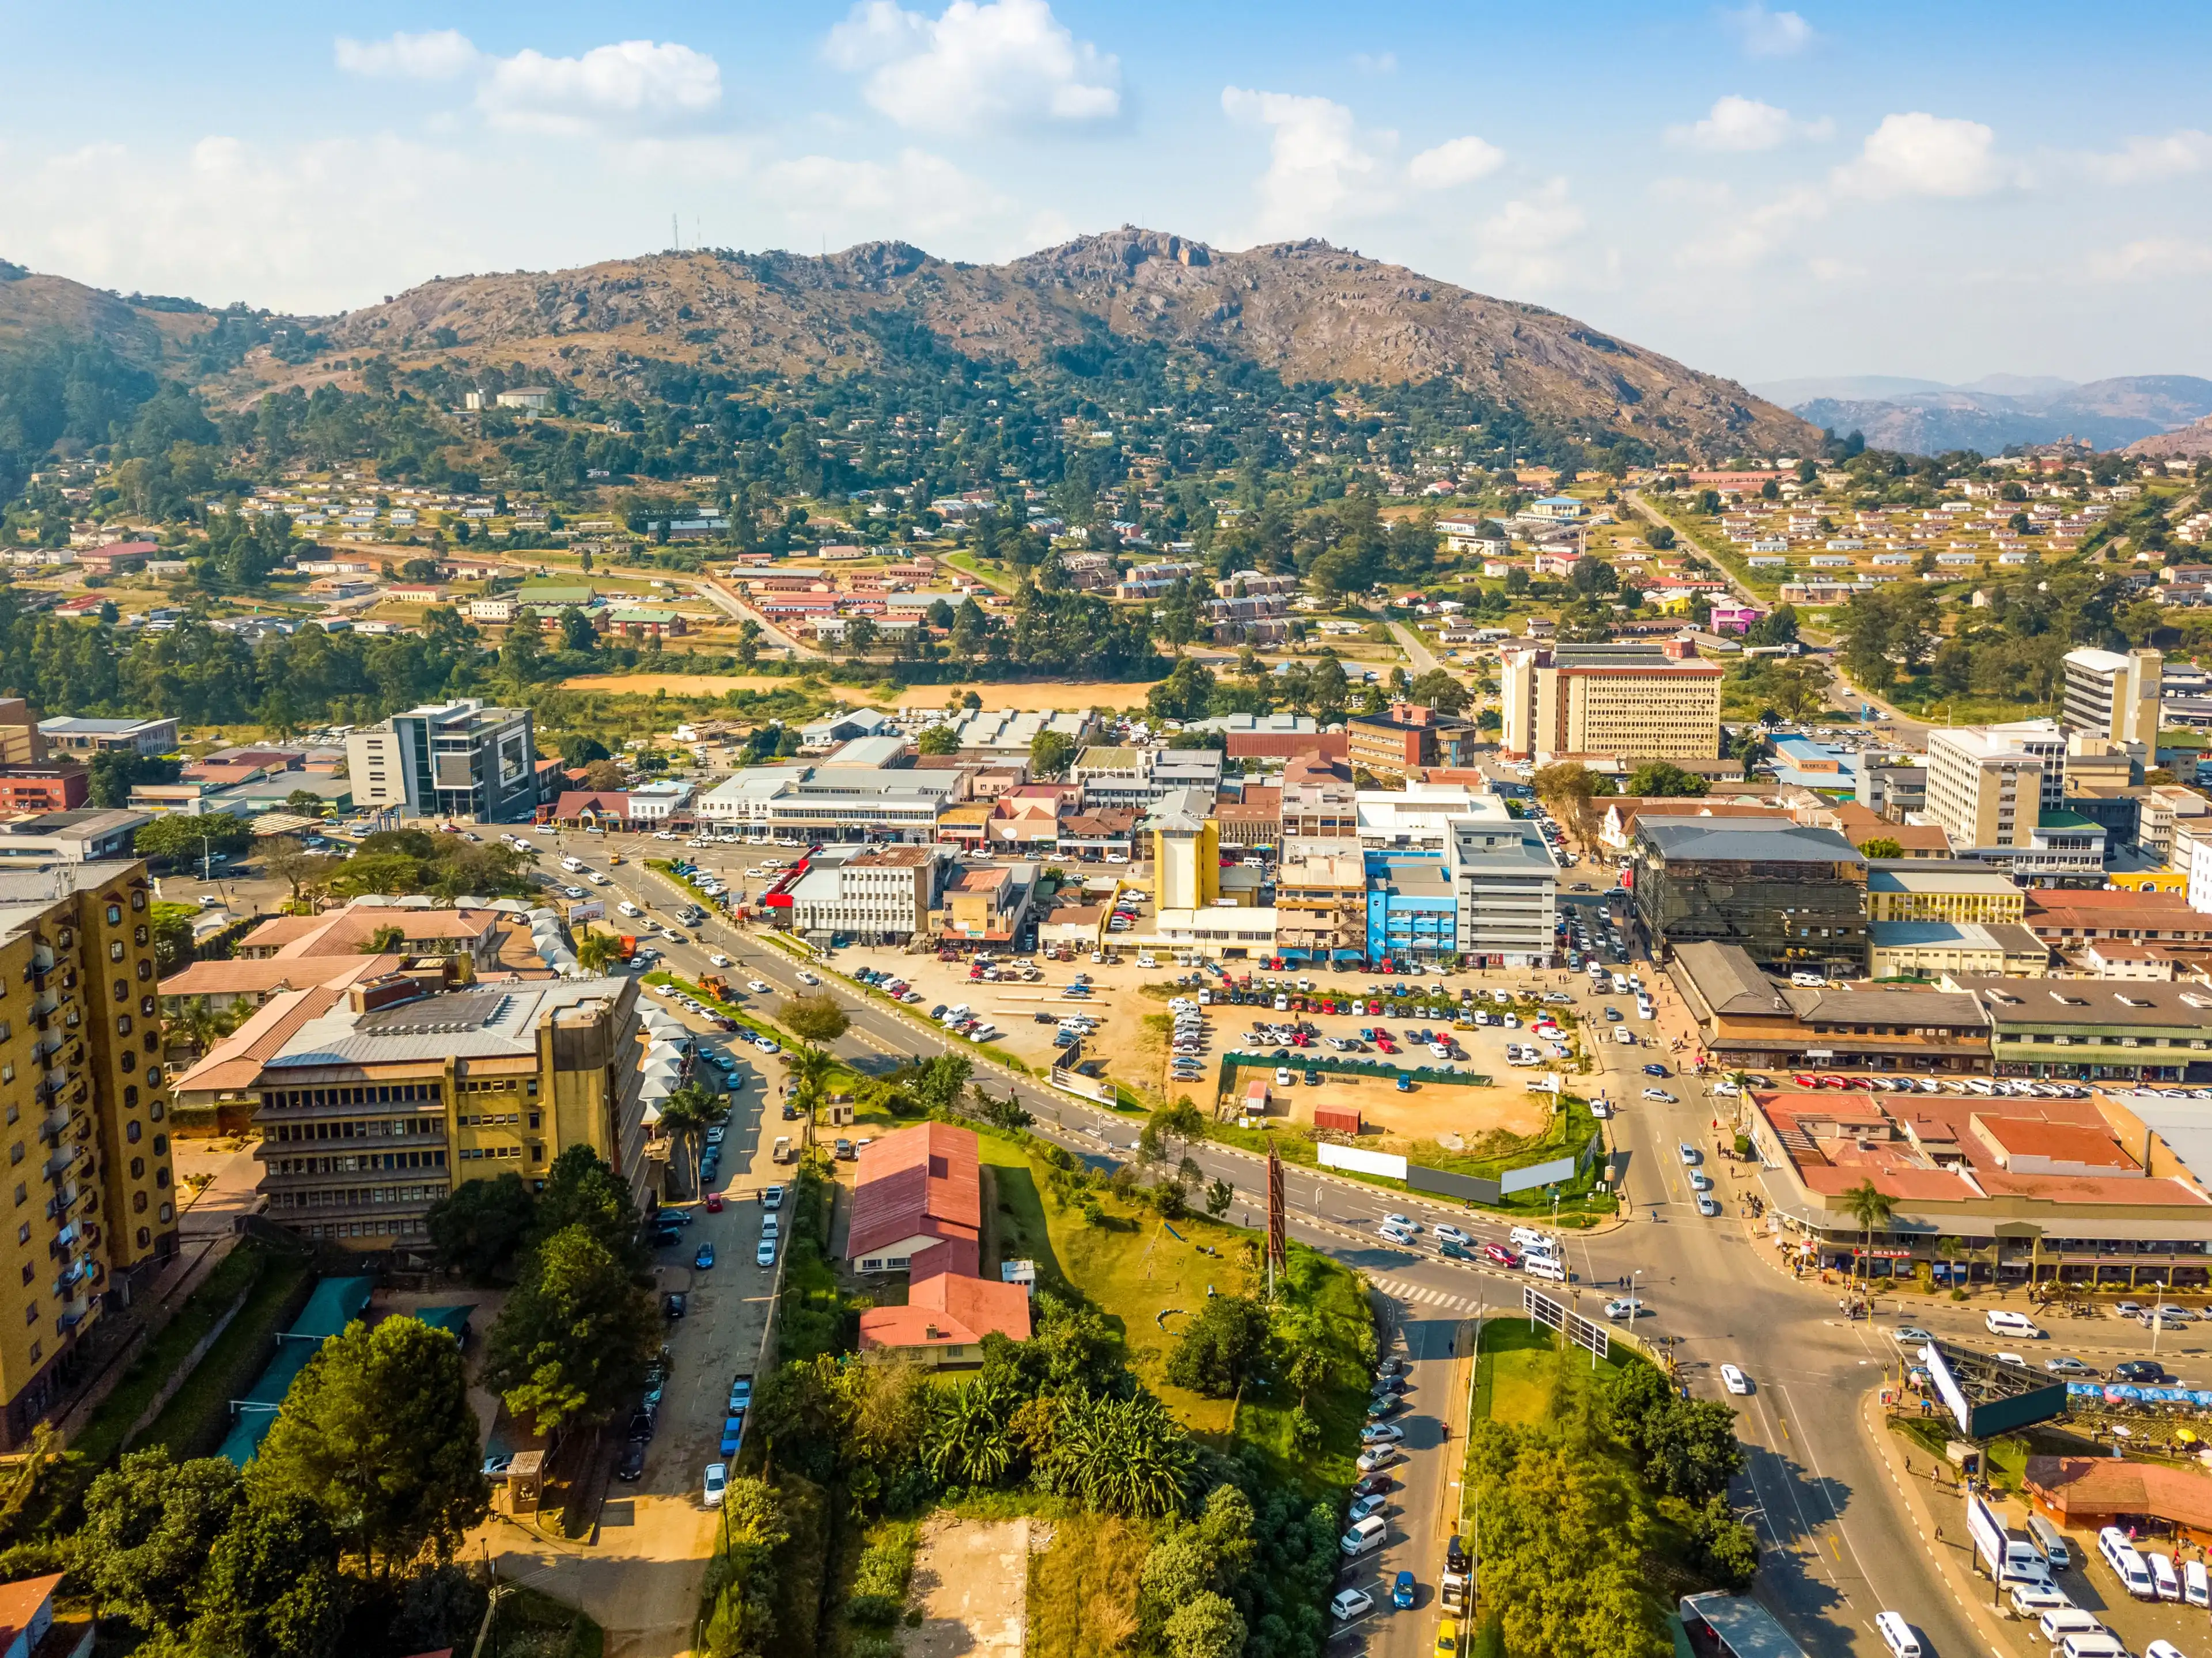 Aerial view of downtown of Mbabane during the day, capital city of Eswatini known as Swaziland